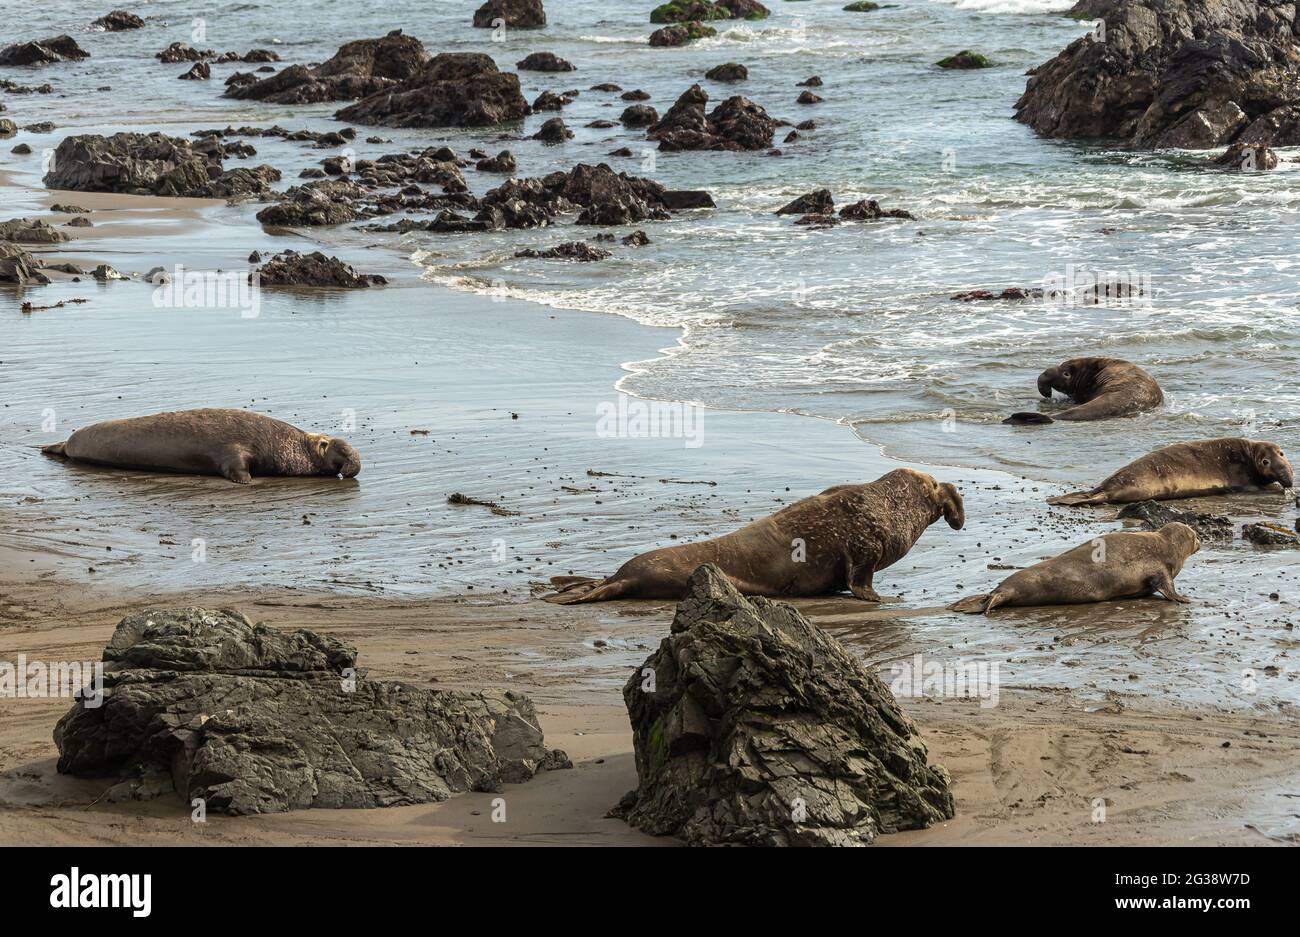 San Simeon, CA, USA - February 12, 2014: Elephant Seal Vista point. 4 males and 1 of them chasing a female at surf breaks of ocean with plenty of shar Stock Photo